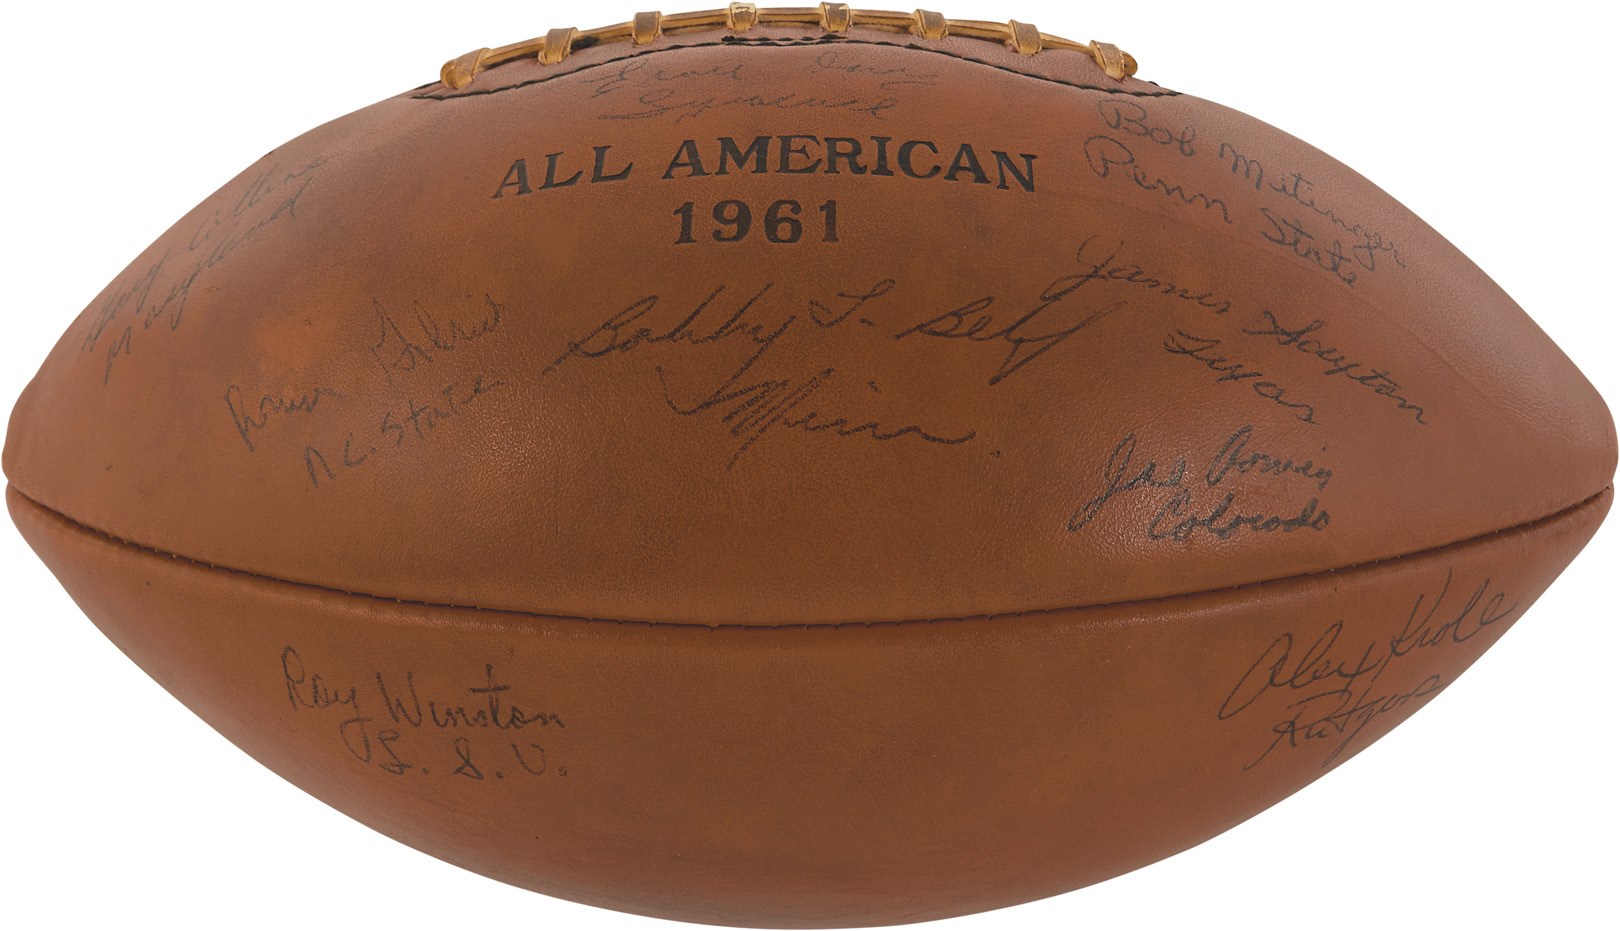 1961 College All-Americans Signed Football with Ernie Davis (PSA)